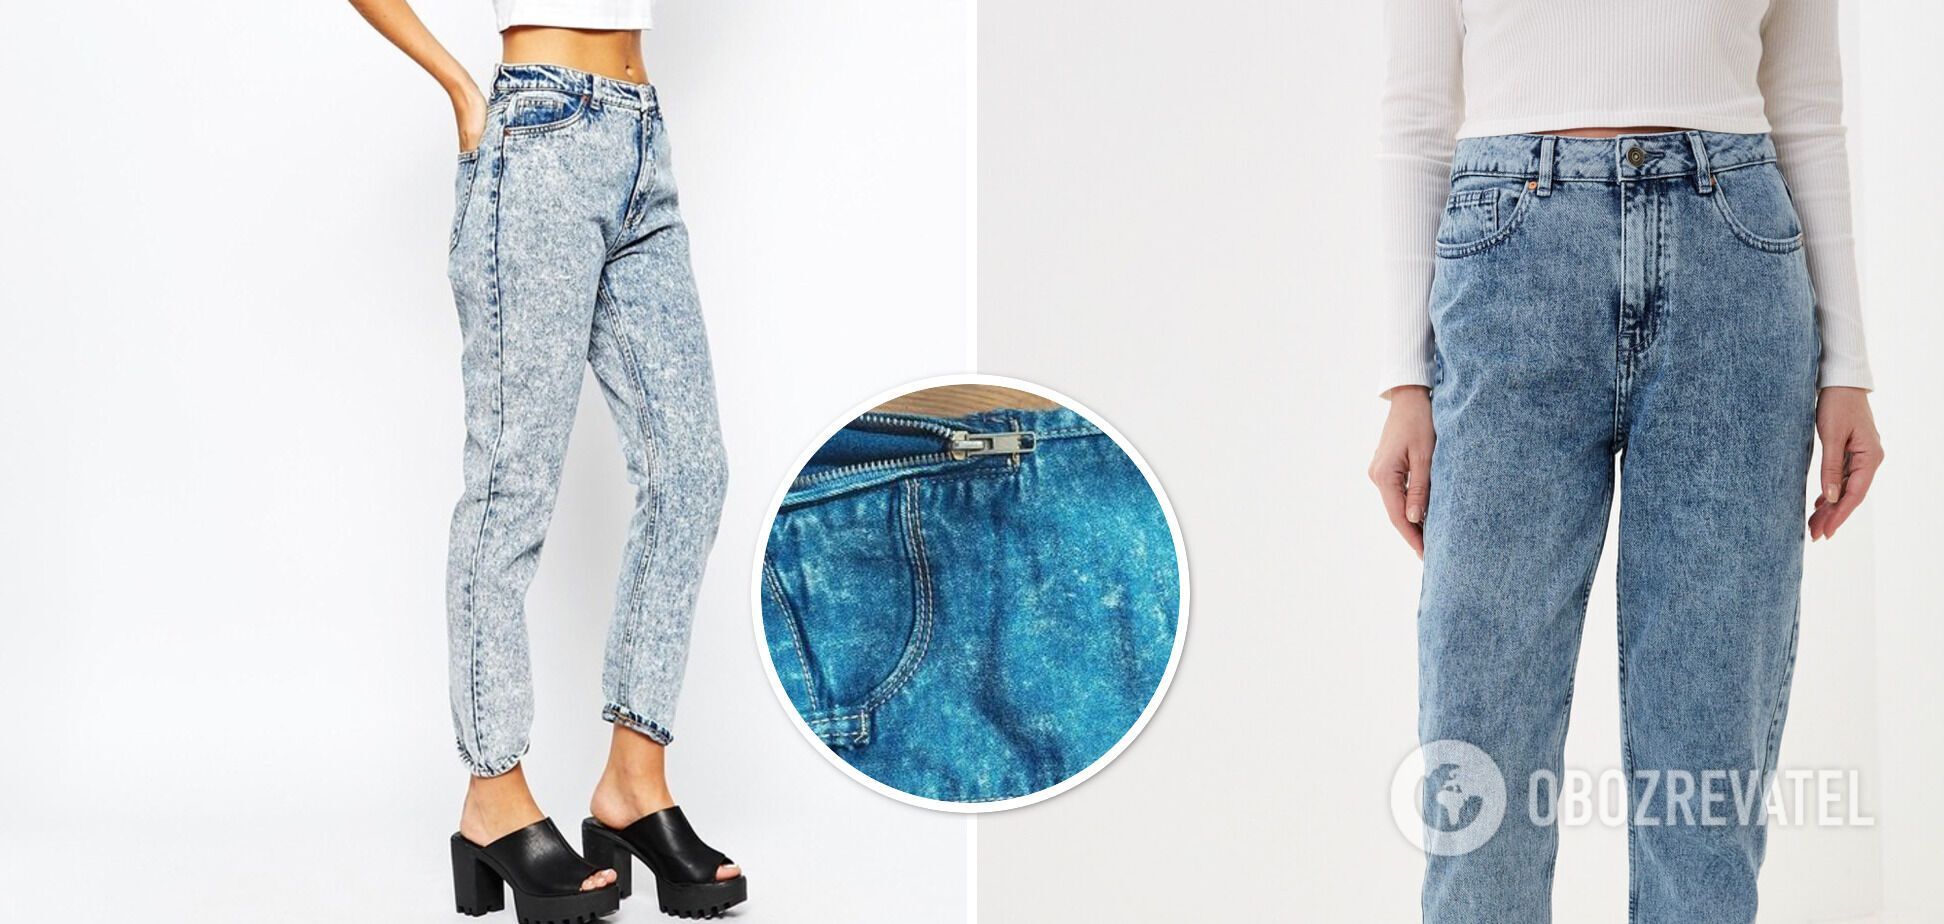 How to restore the shape of stretched jeans: they will look like new